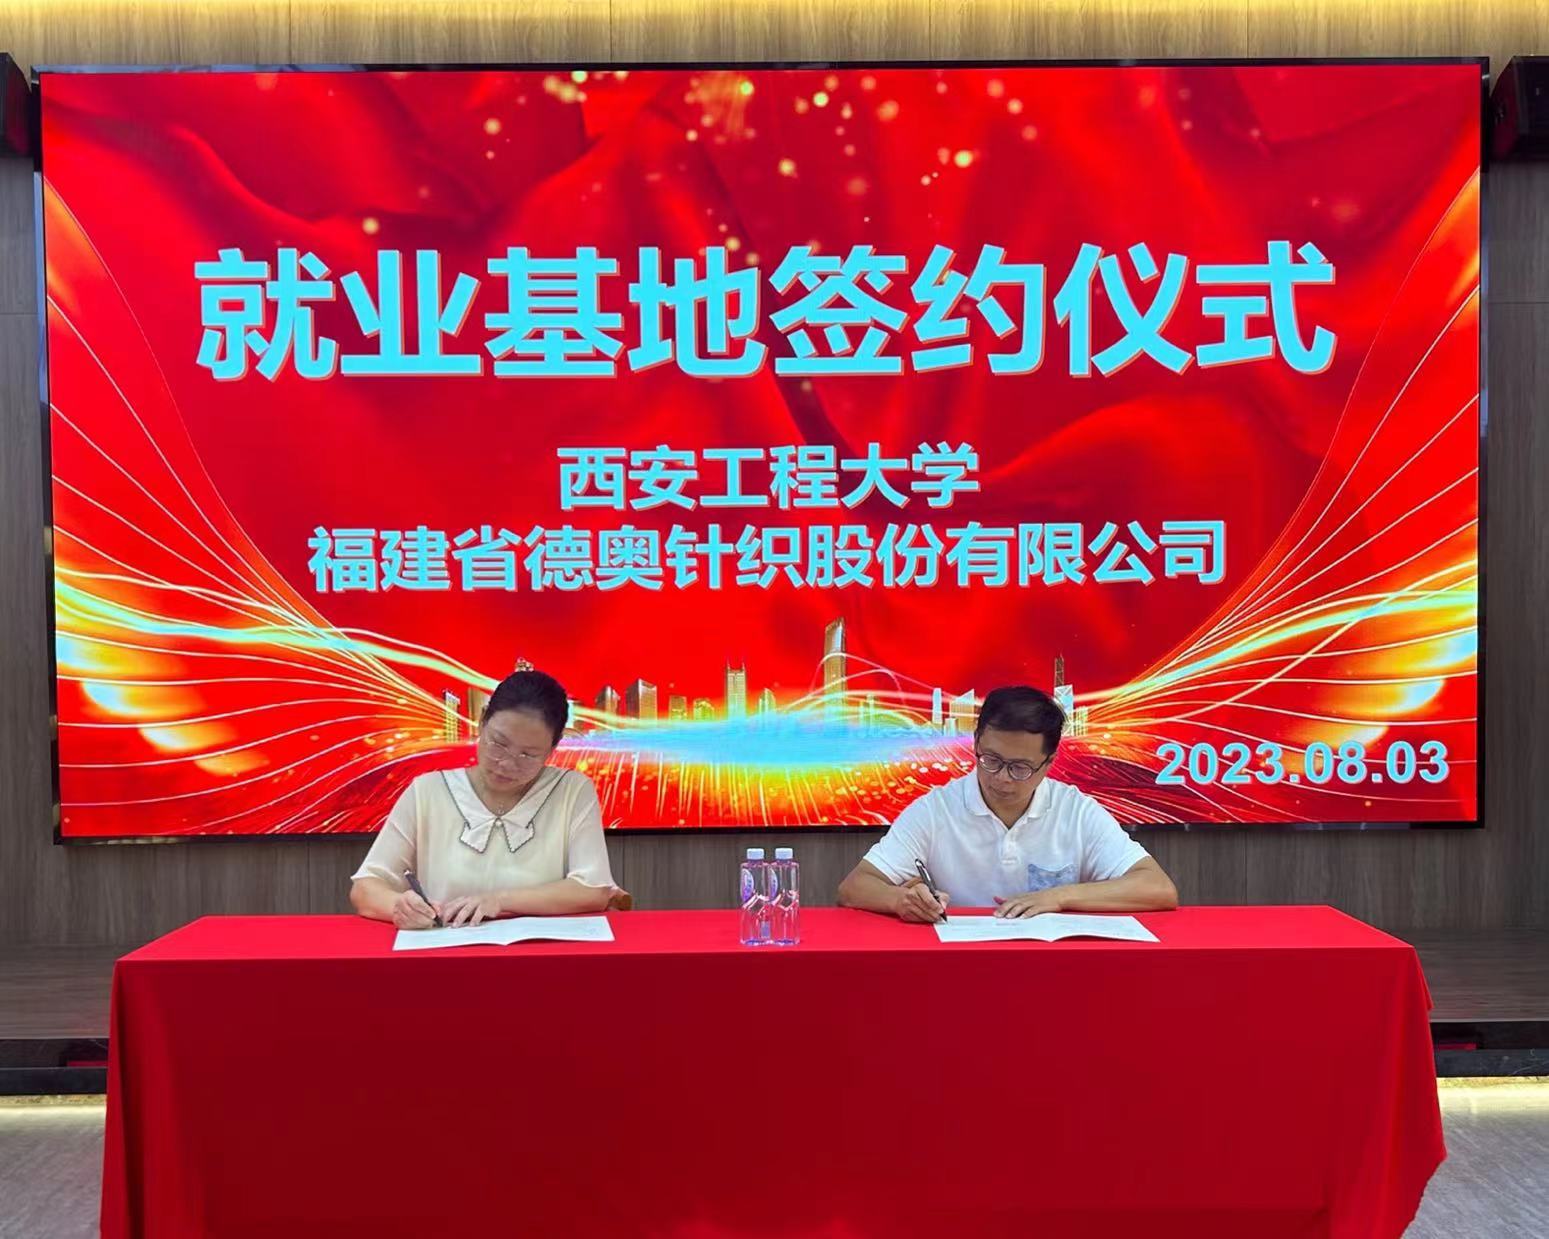 Signing ceremony of co-construction employment base between Deao Shares and Xi 'an Polytechnic University.